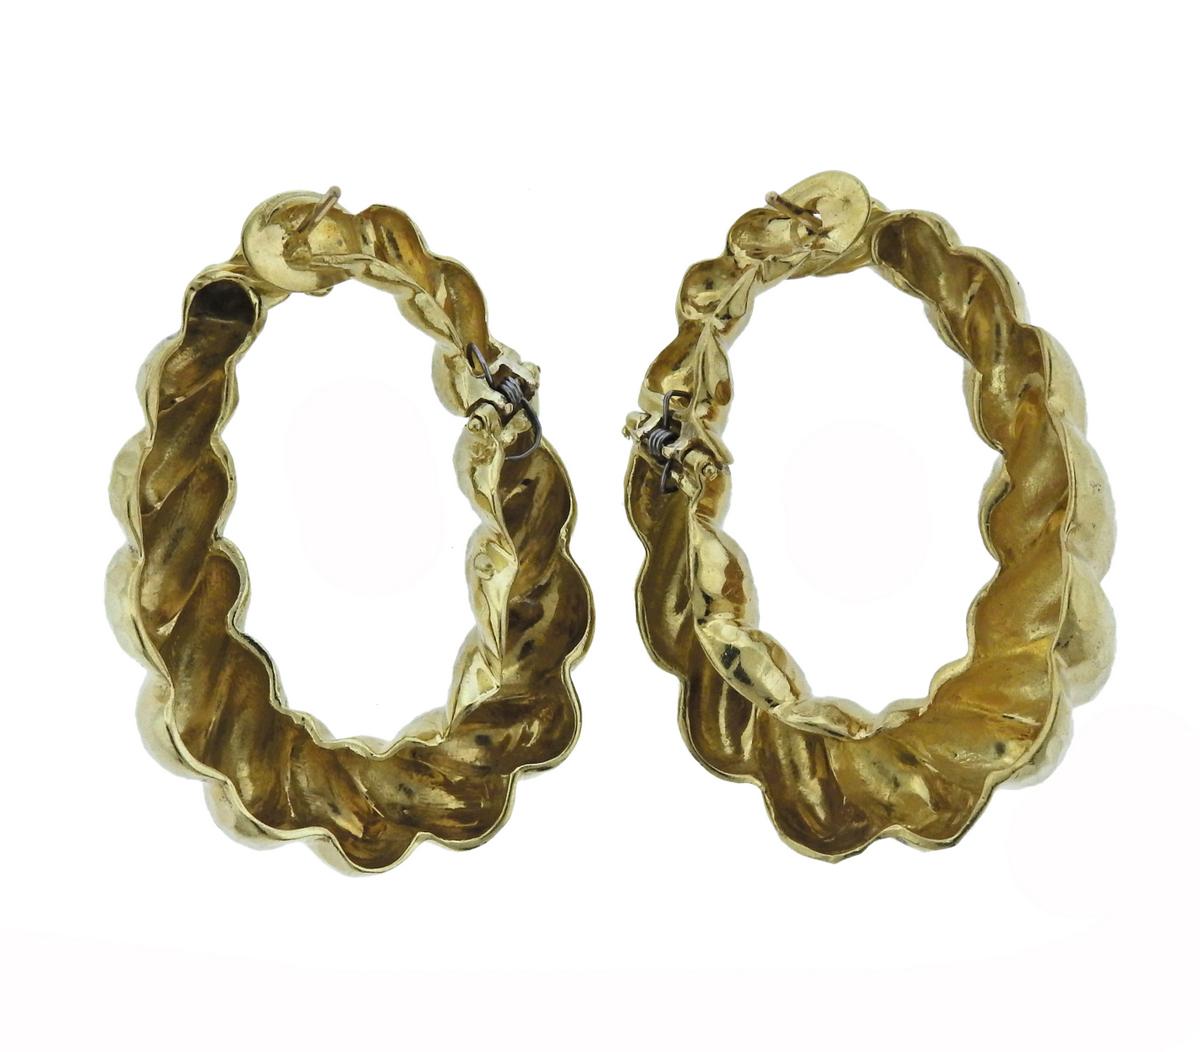  Pair of large 18k hammered gold twisted hoop earrings. Earrings are 45mm x 33mm, widest point of the earring - 11mm, weigh 37 grams. 